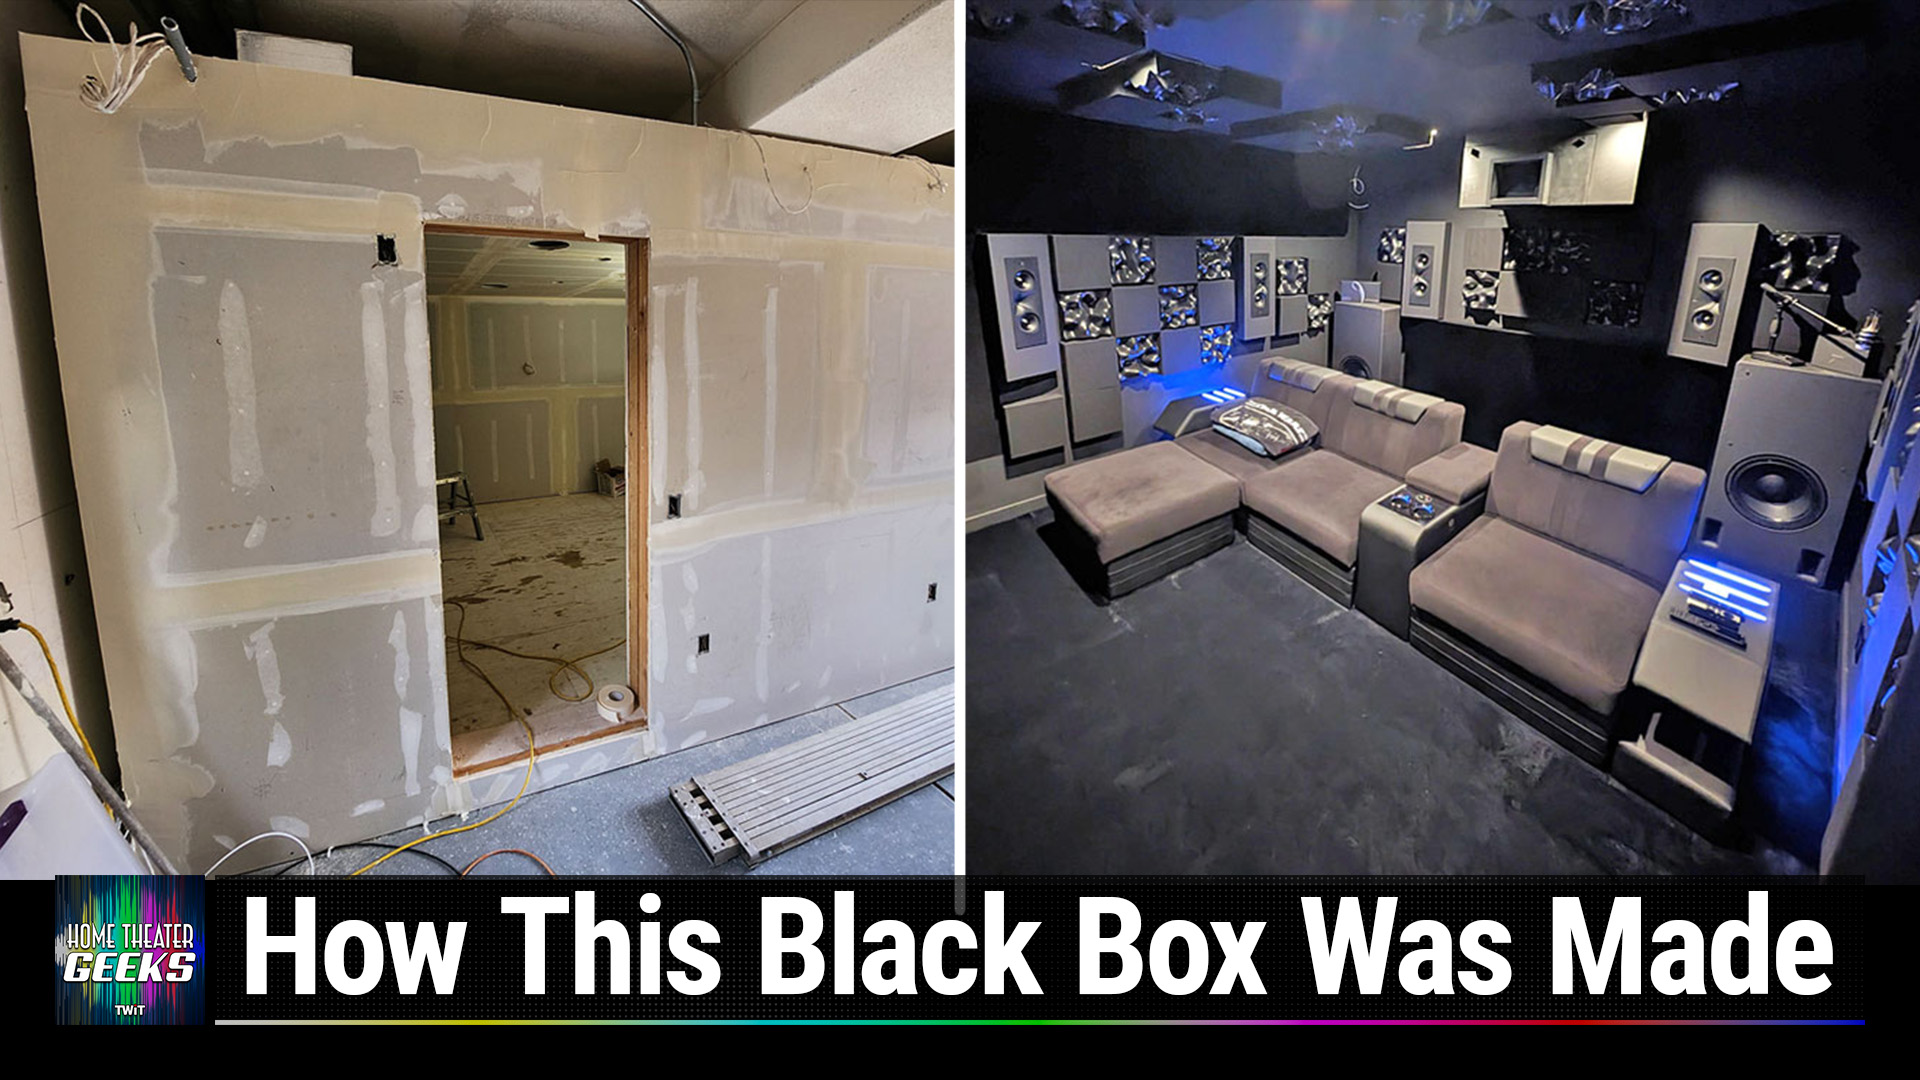 Black Box Home Theater! (Home Theater Geeks #431)